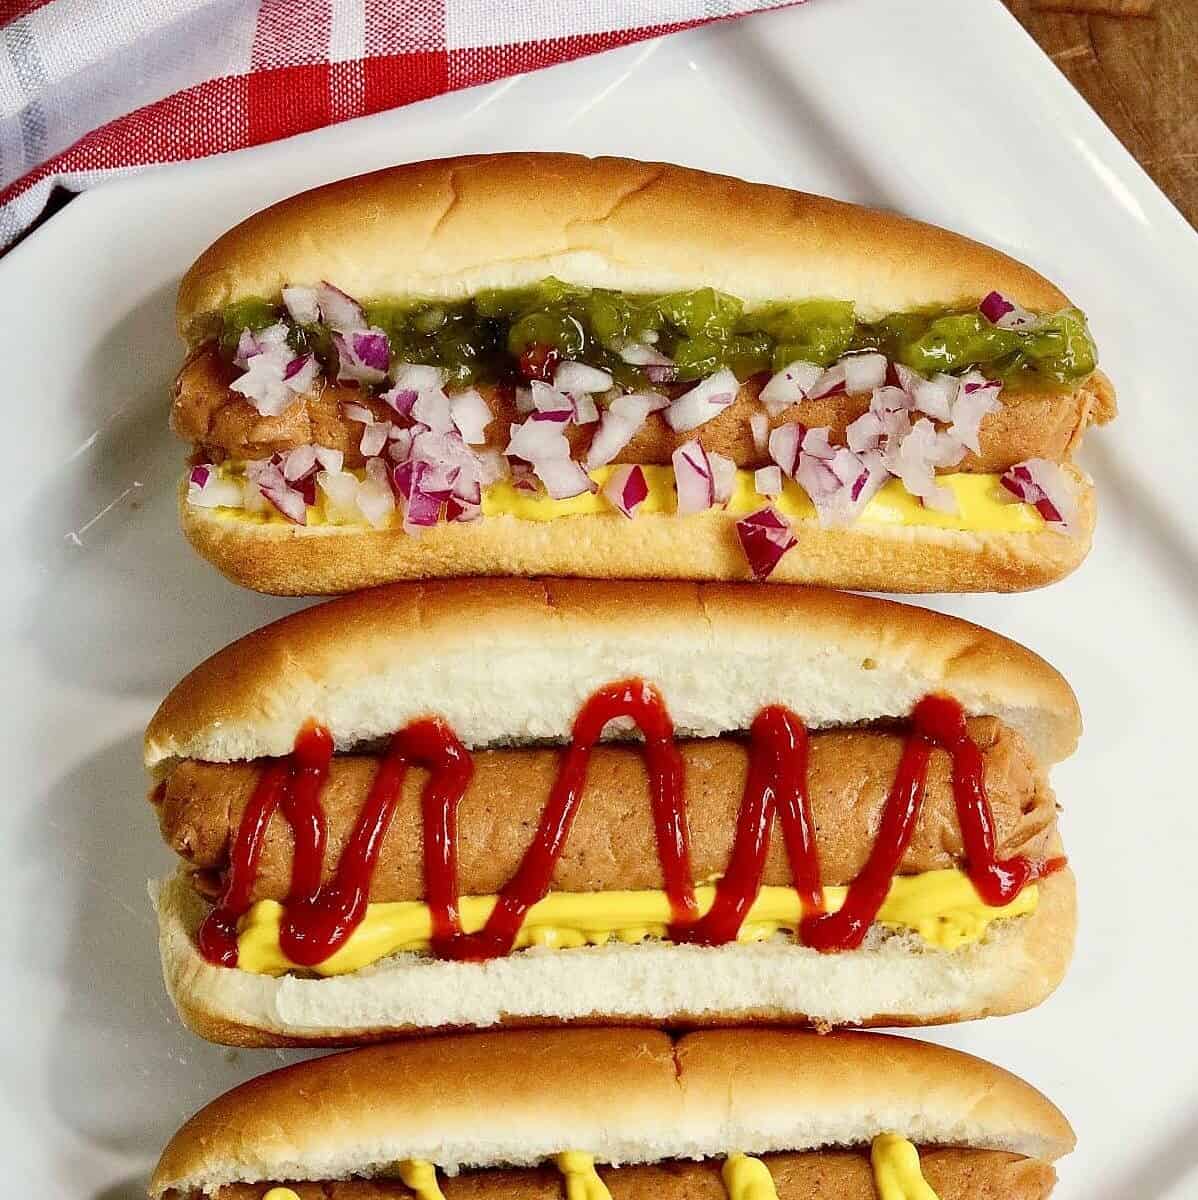  These vegan hot dogs are the perfect addition to your next backyard BBQ!